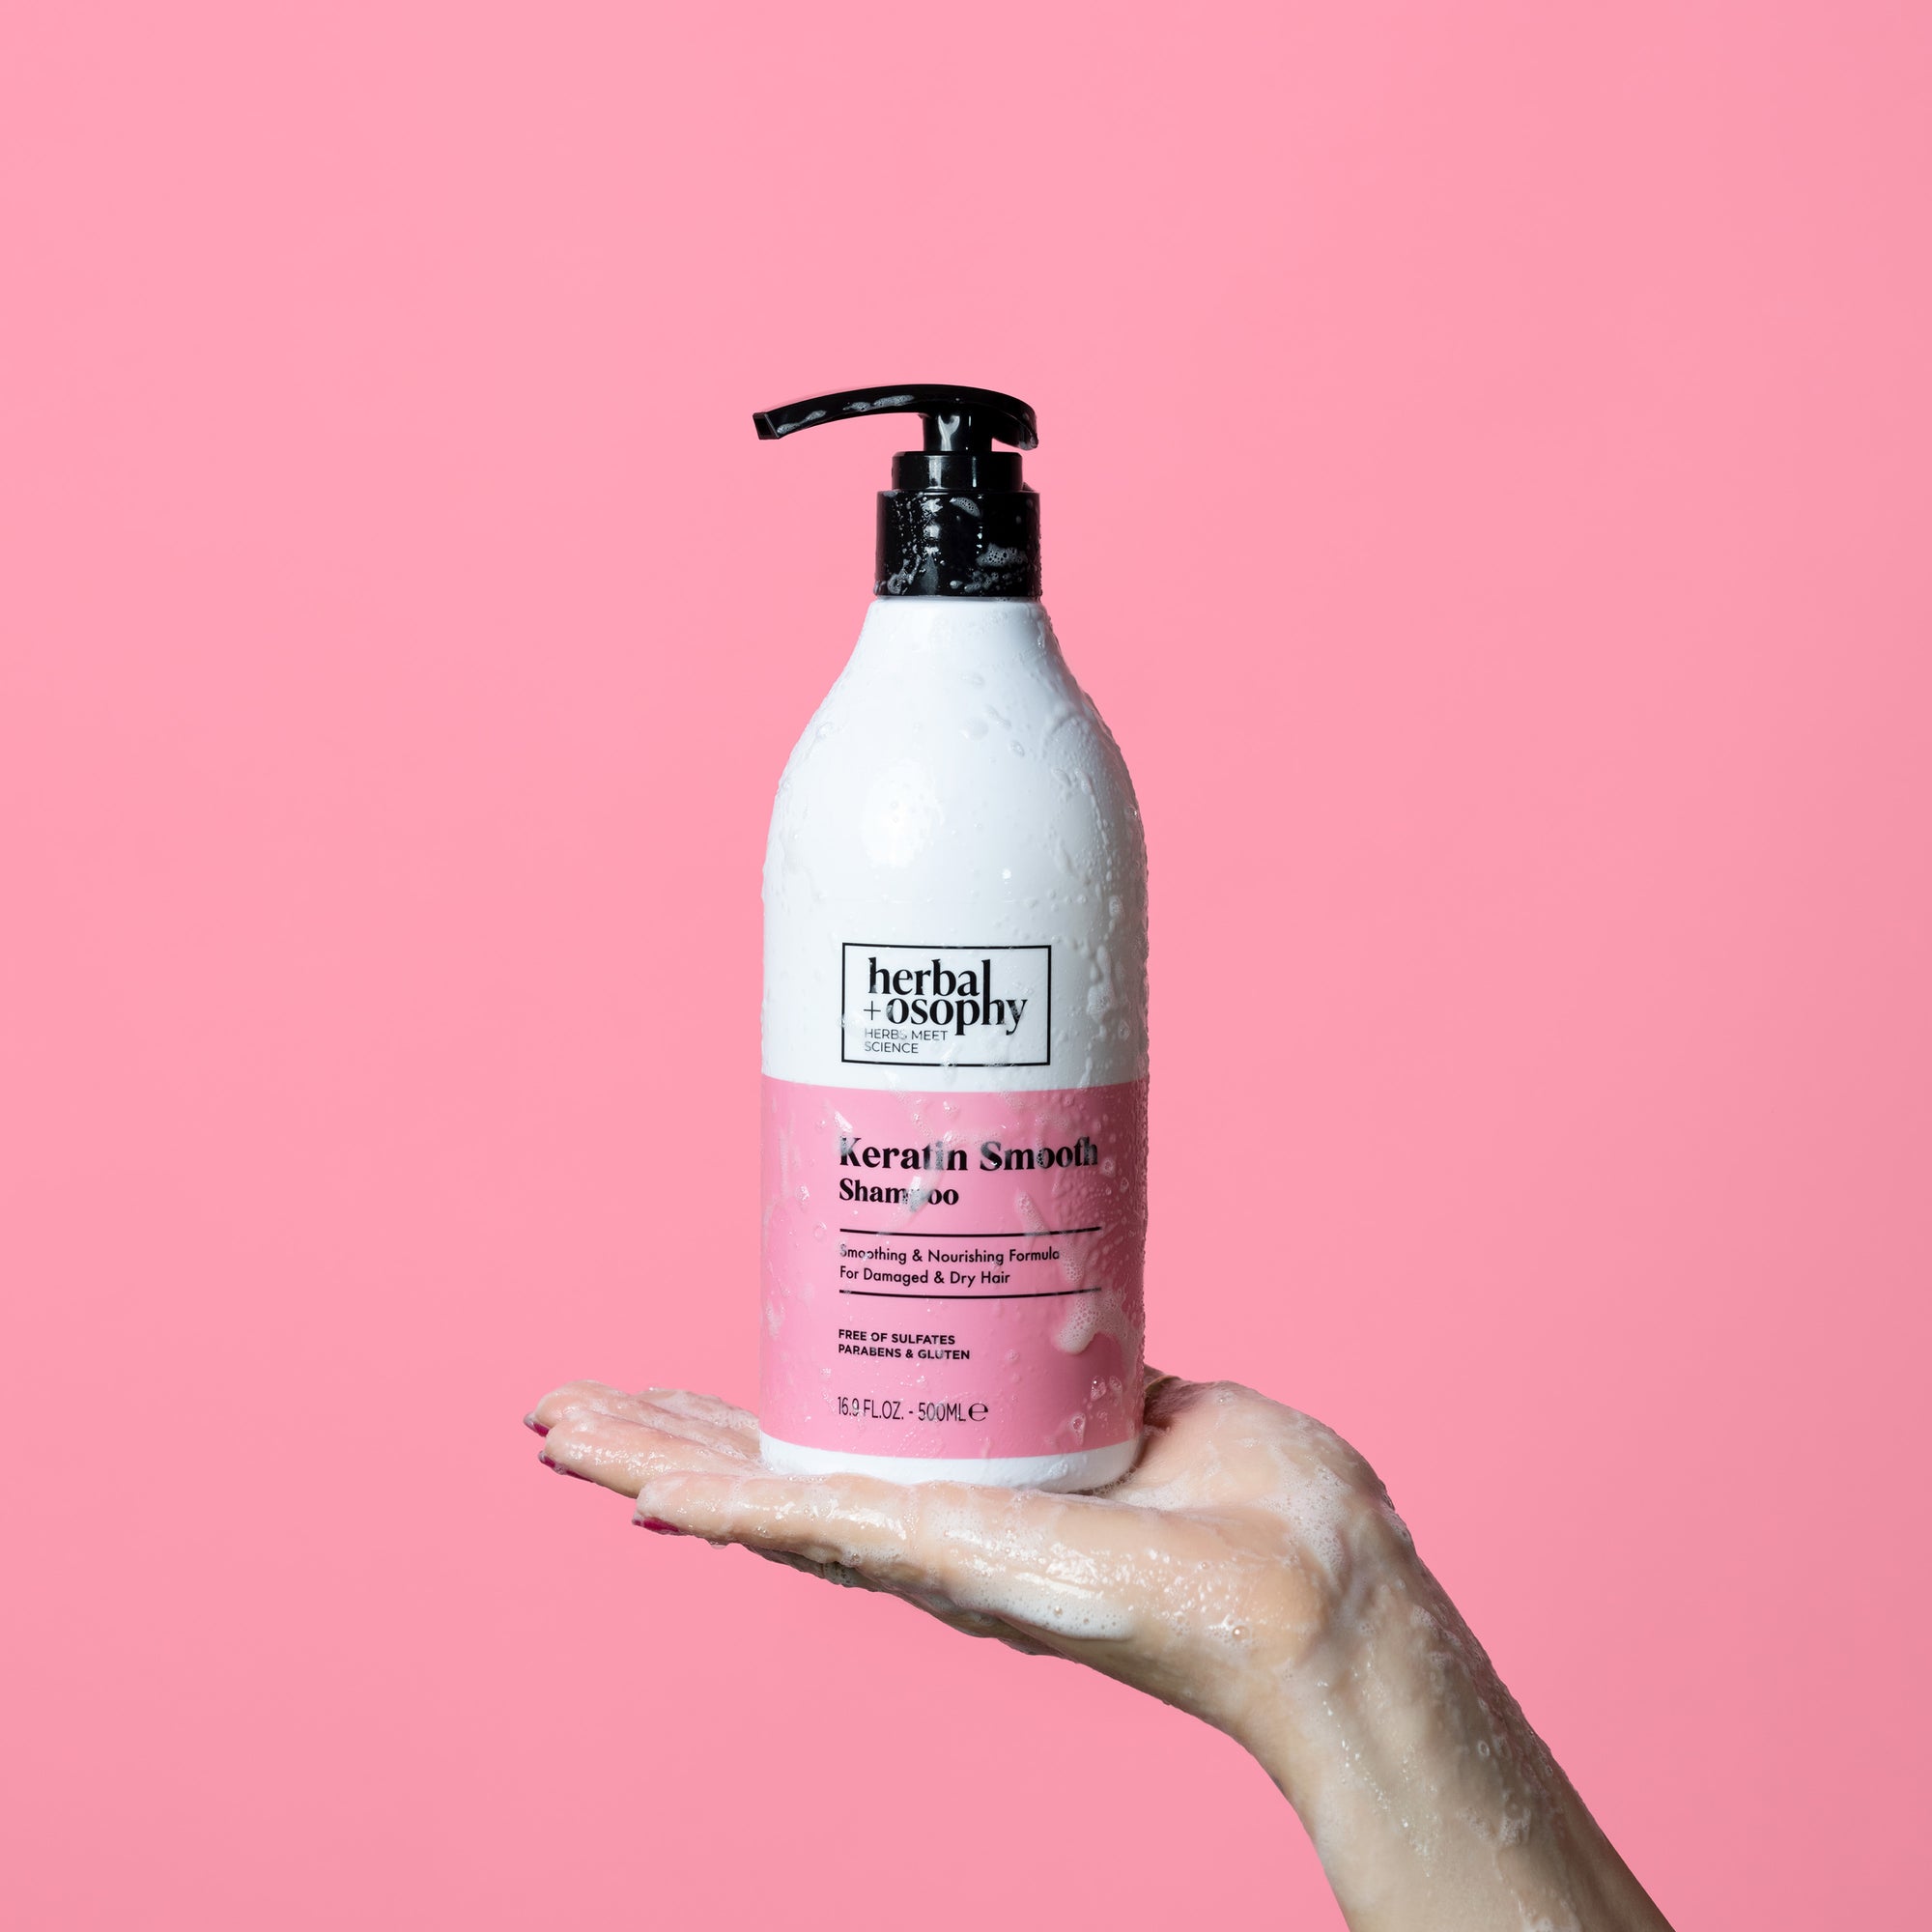 Herbalosophy Keratin Smooth Shampoo bottle held in palm of hand with wet suds on bottle and hand in front of pink background